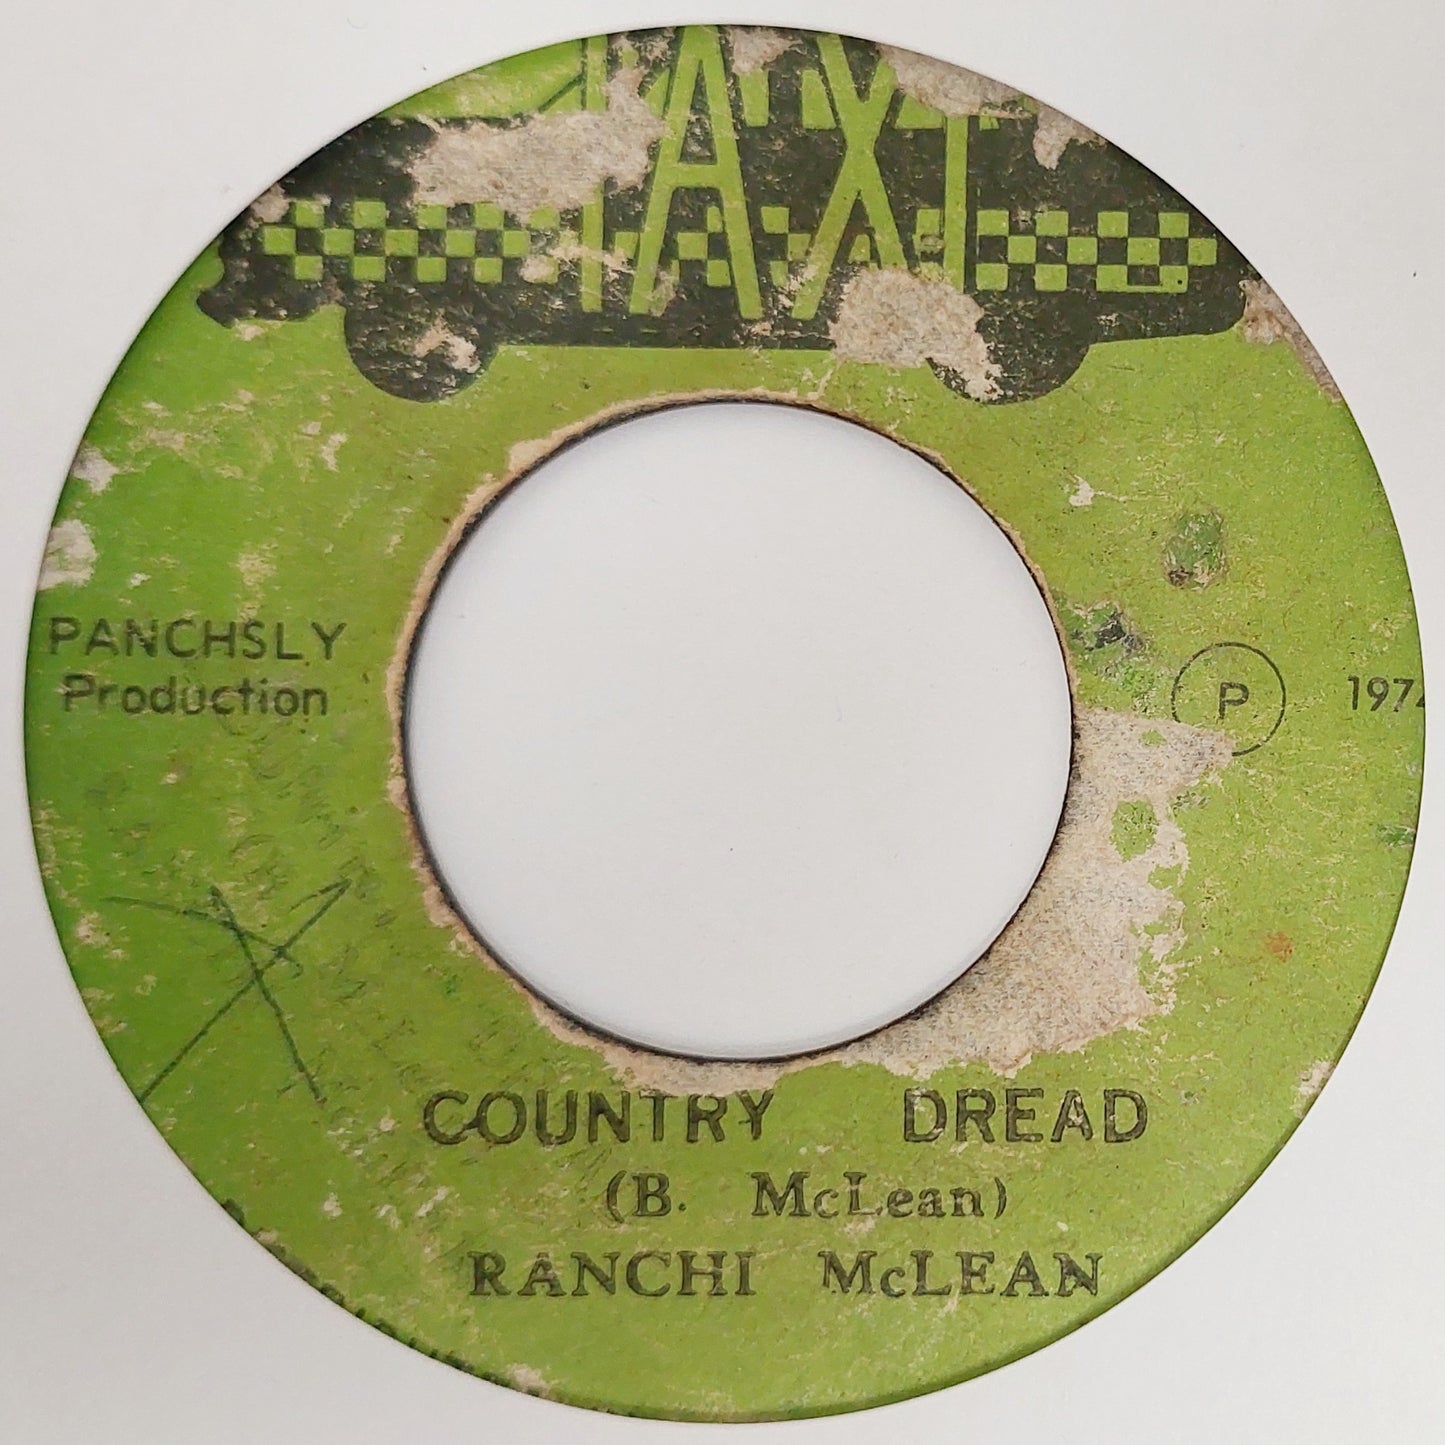 Ranchi McLean - Country Dread